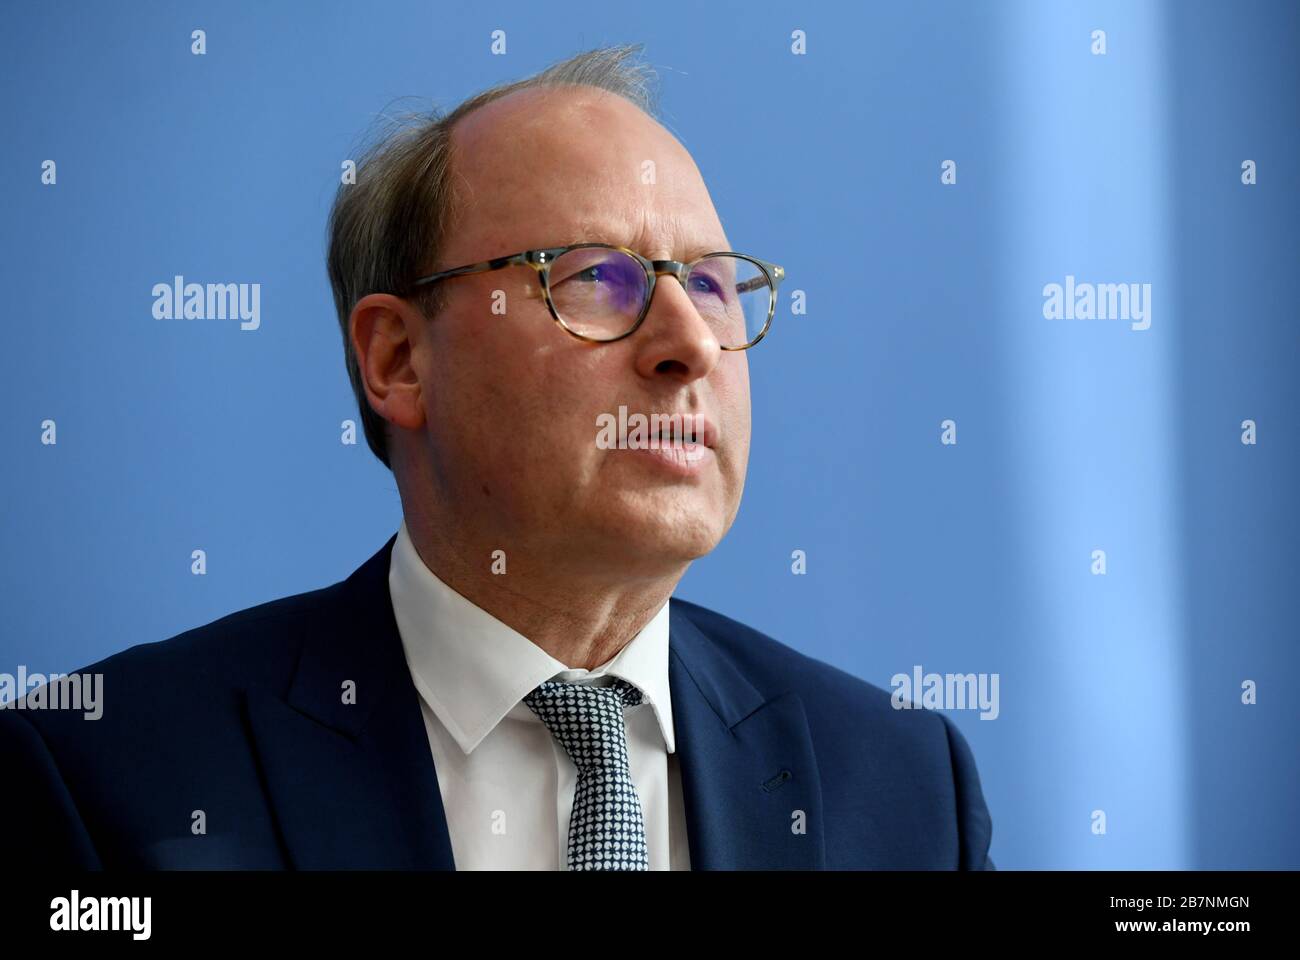 Berlin, Germany. 17th Mar, 2020. Stefan Genth, General Manager of the German Retail Association (HDE), attends a press conference on the supply situation in Germany during the Corona Pandemic. Credit: Annegret Hilse/Reuters/POOL/dpa/Alamy Live News Stock Photo